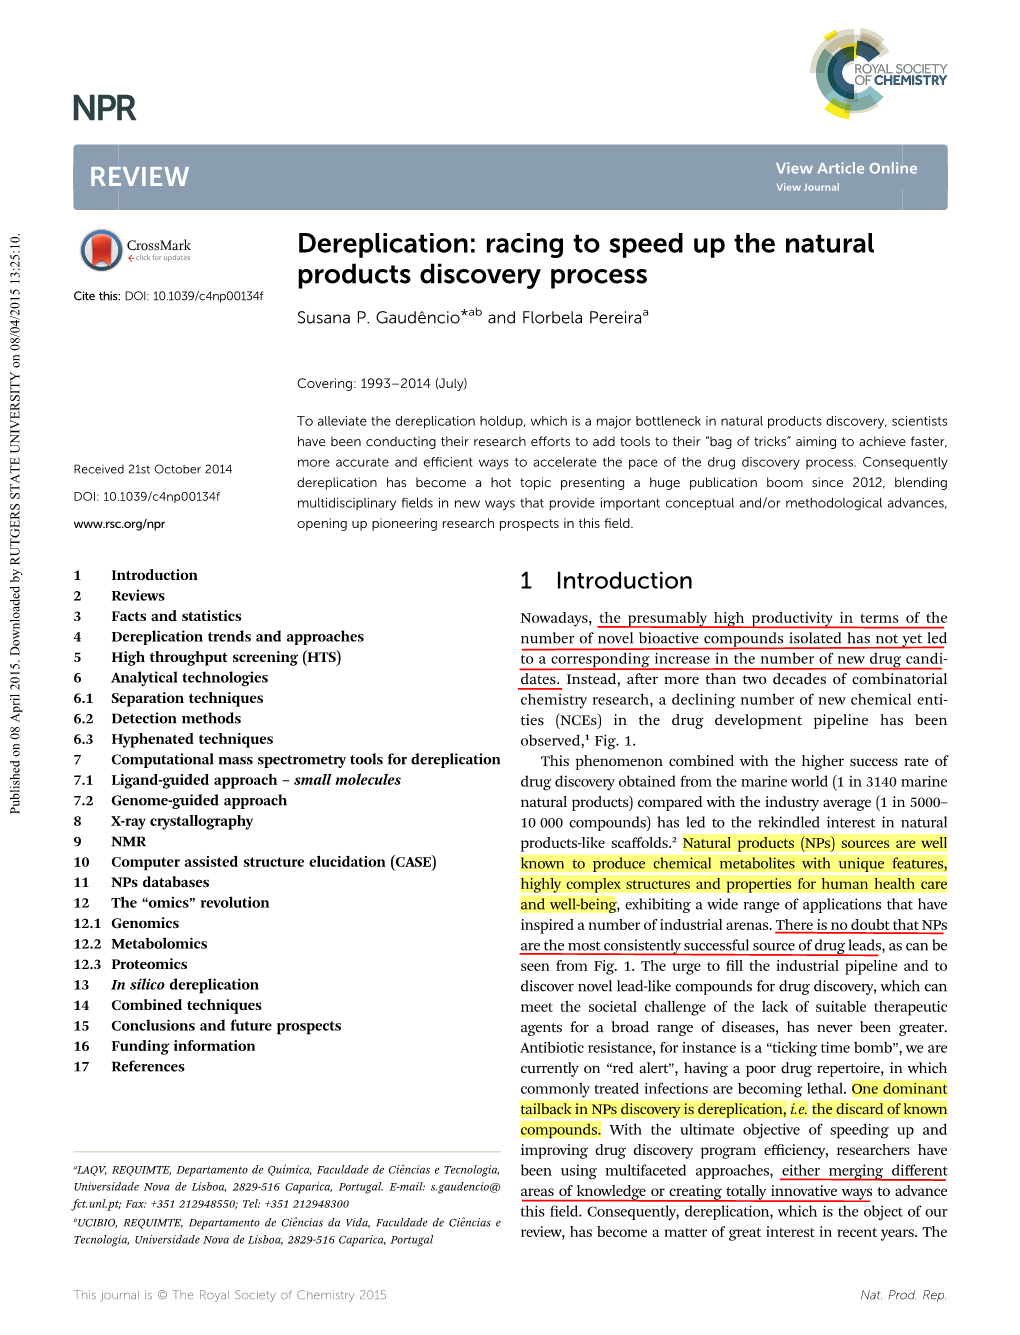 Dereplication: Racing to Speed up the Natural Products Discovery Process Cite This: DOI: 10.1039/C4np00134f Susana P